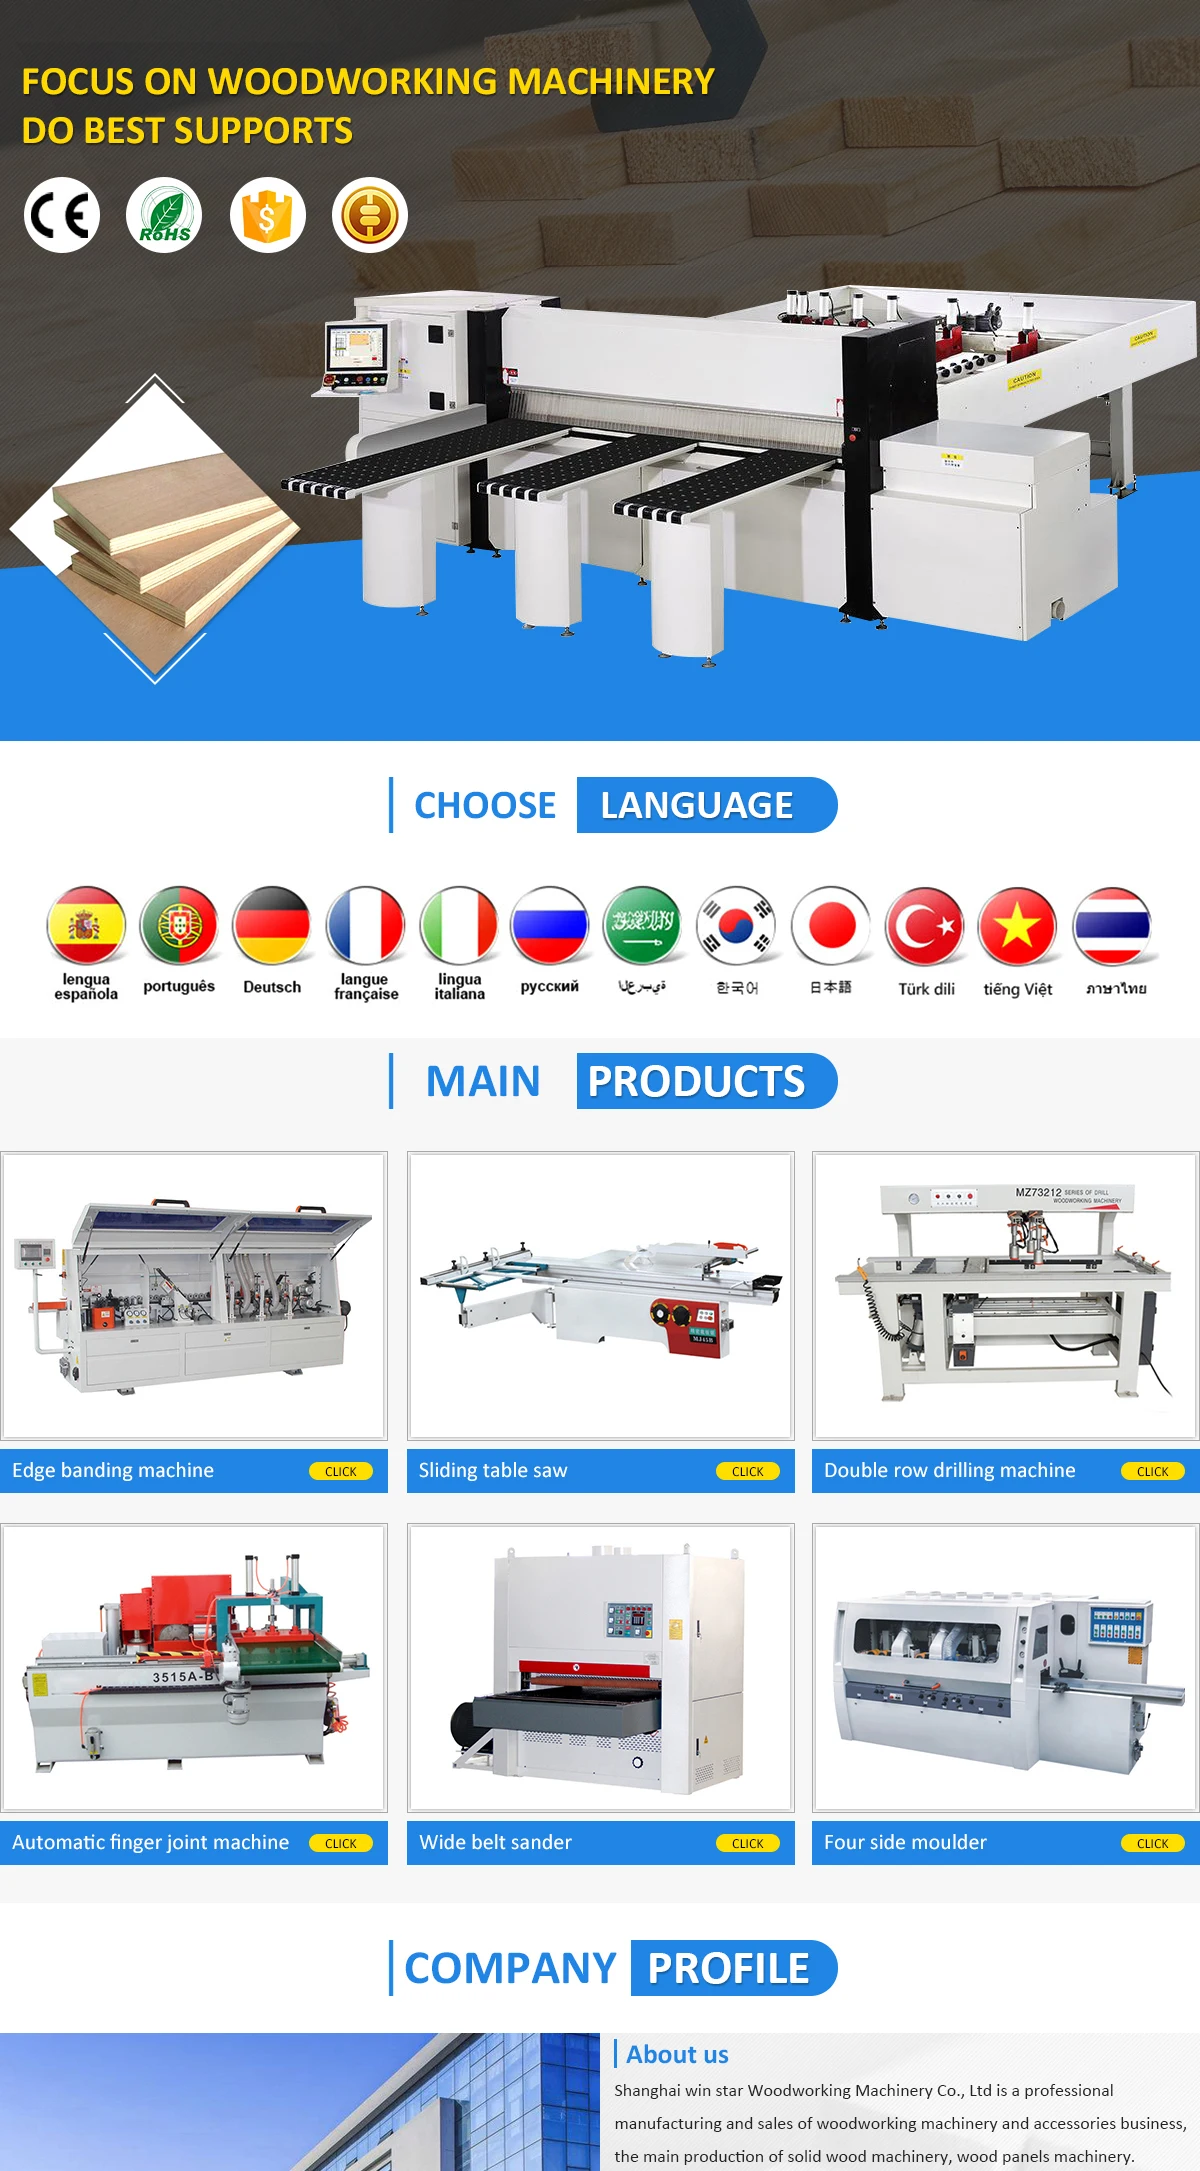 Shanghai Win Star Woodworking Machinery Co Ltd Sliding Table Saw Wood Band Saw